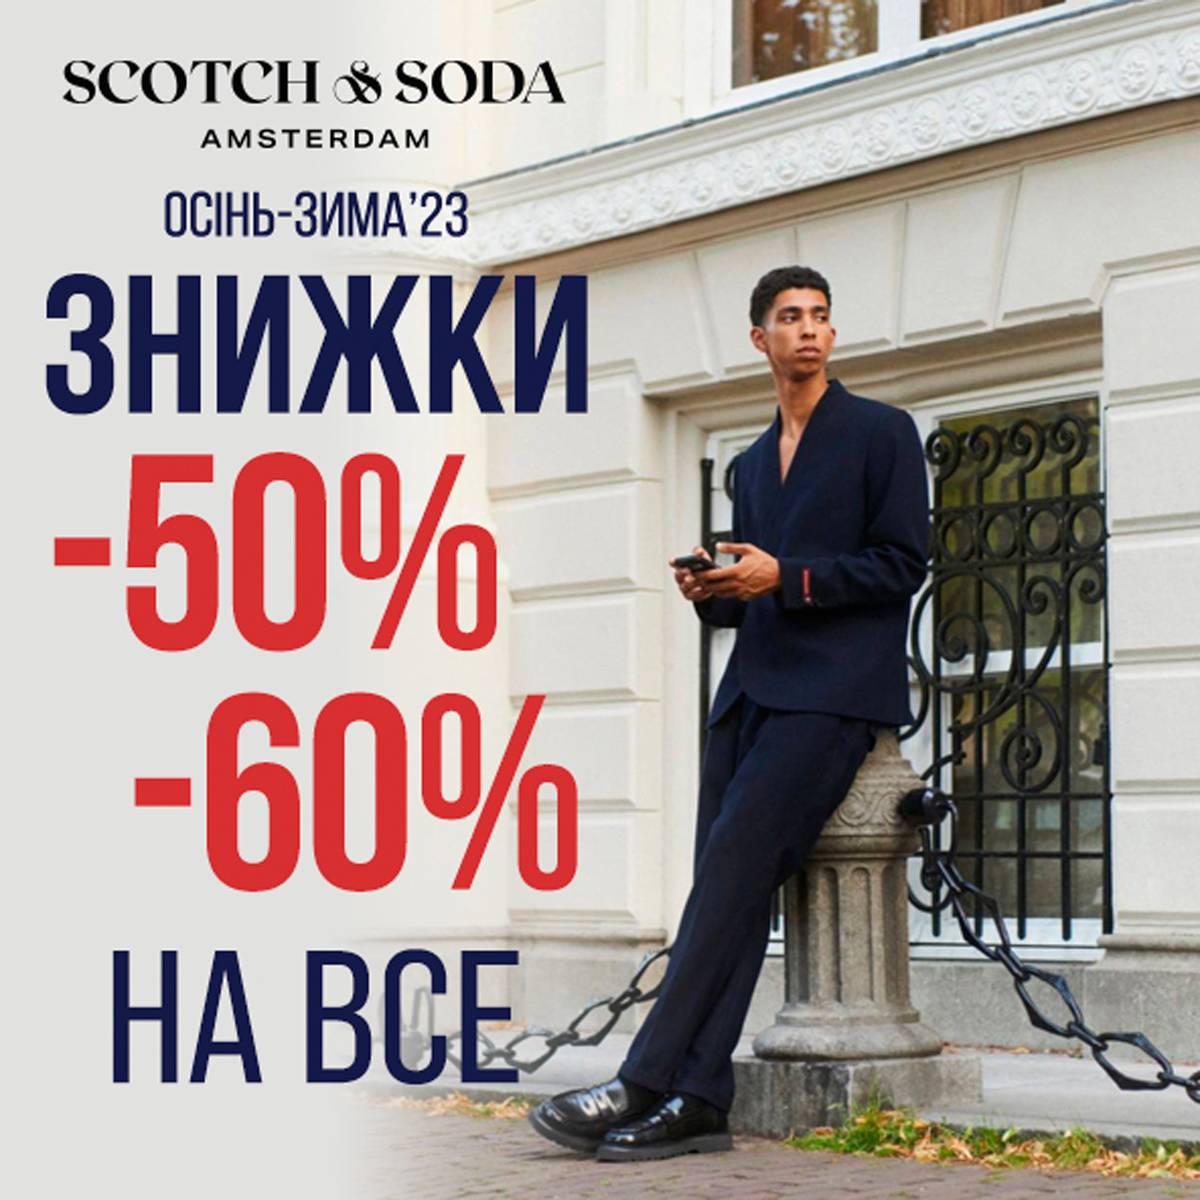 -50% and -60% on everything at Scotch&Soda!